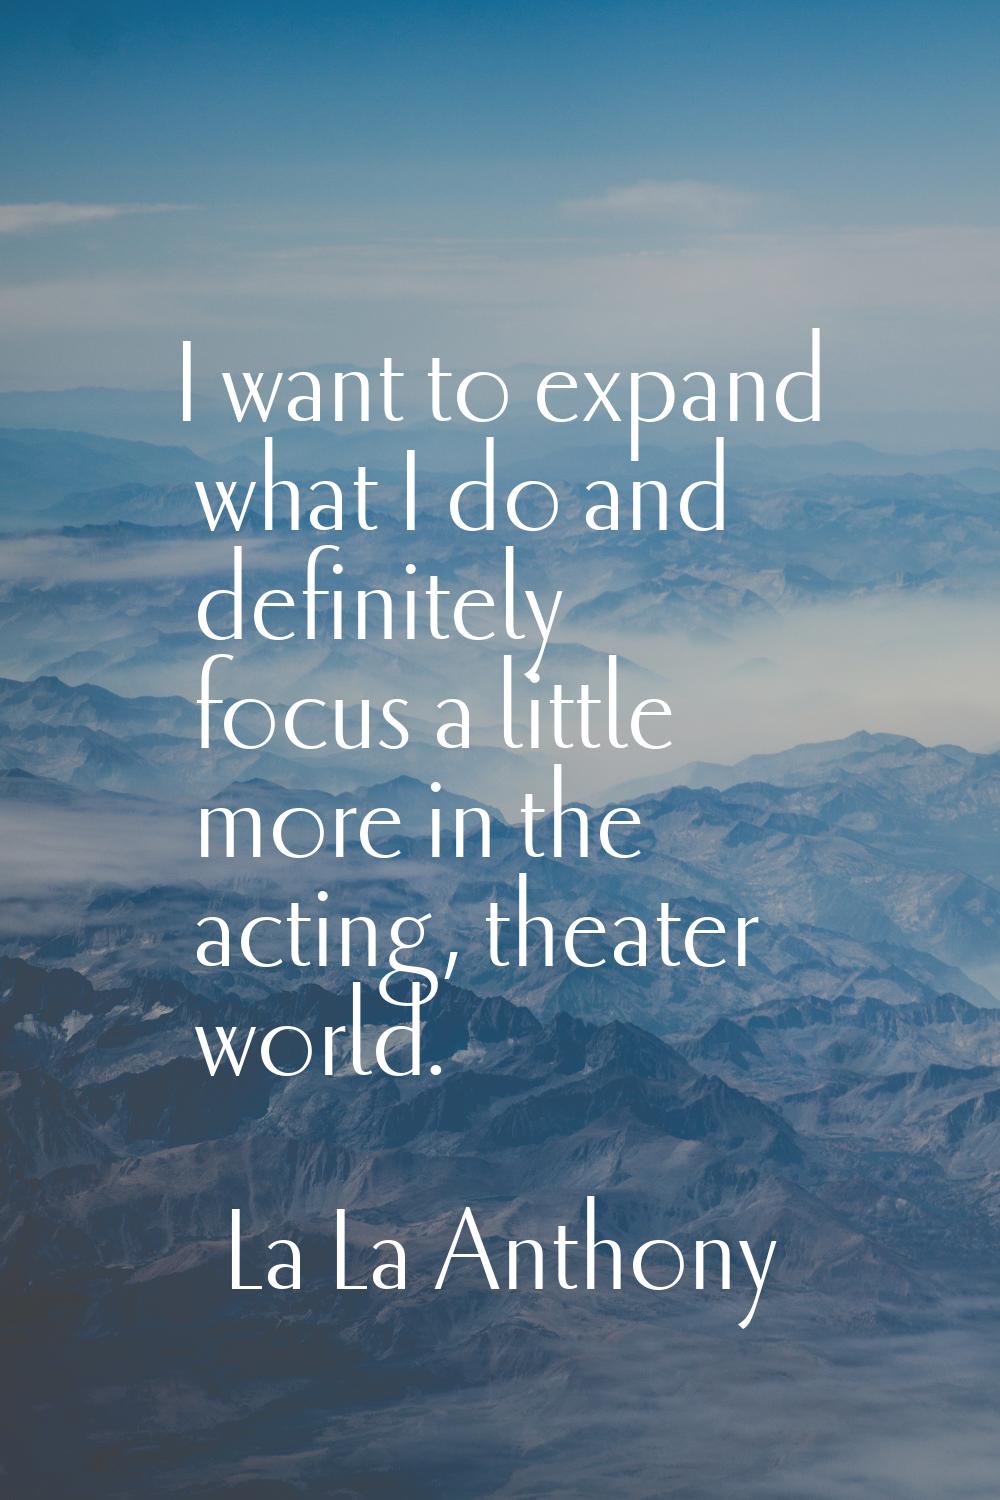 I want to expand what I do and definitely focus a little more in the acting, theater world.